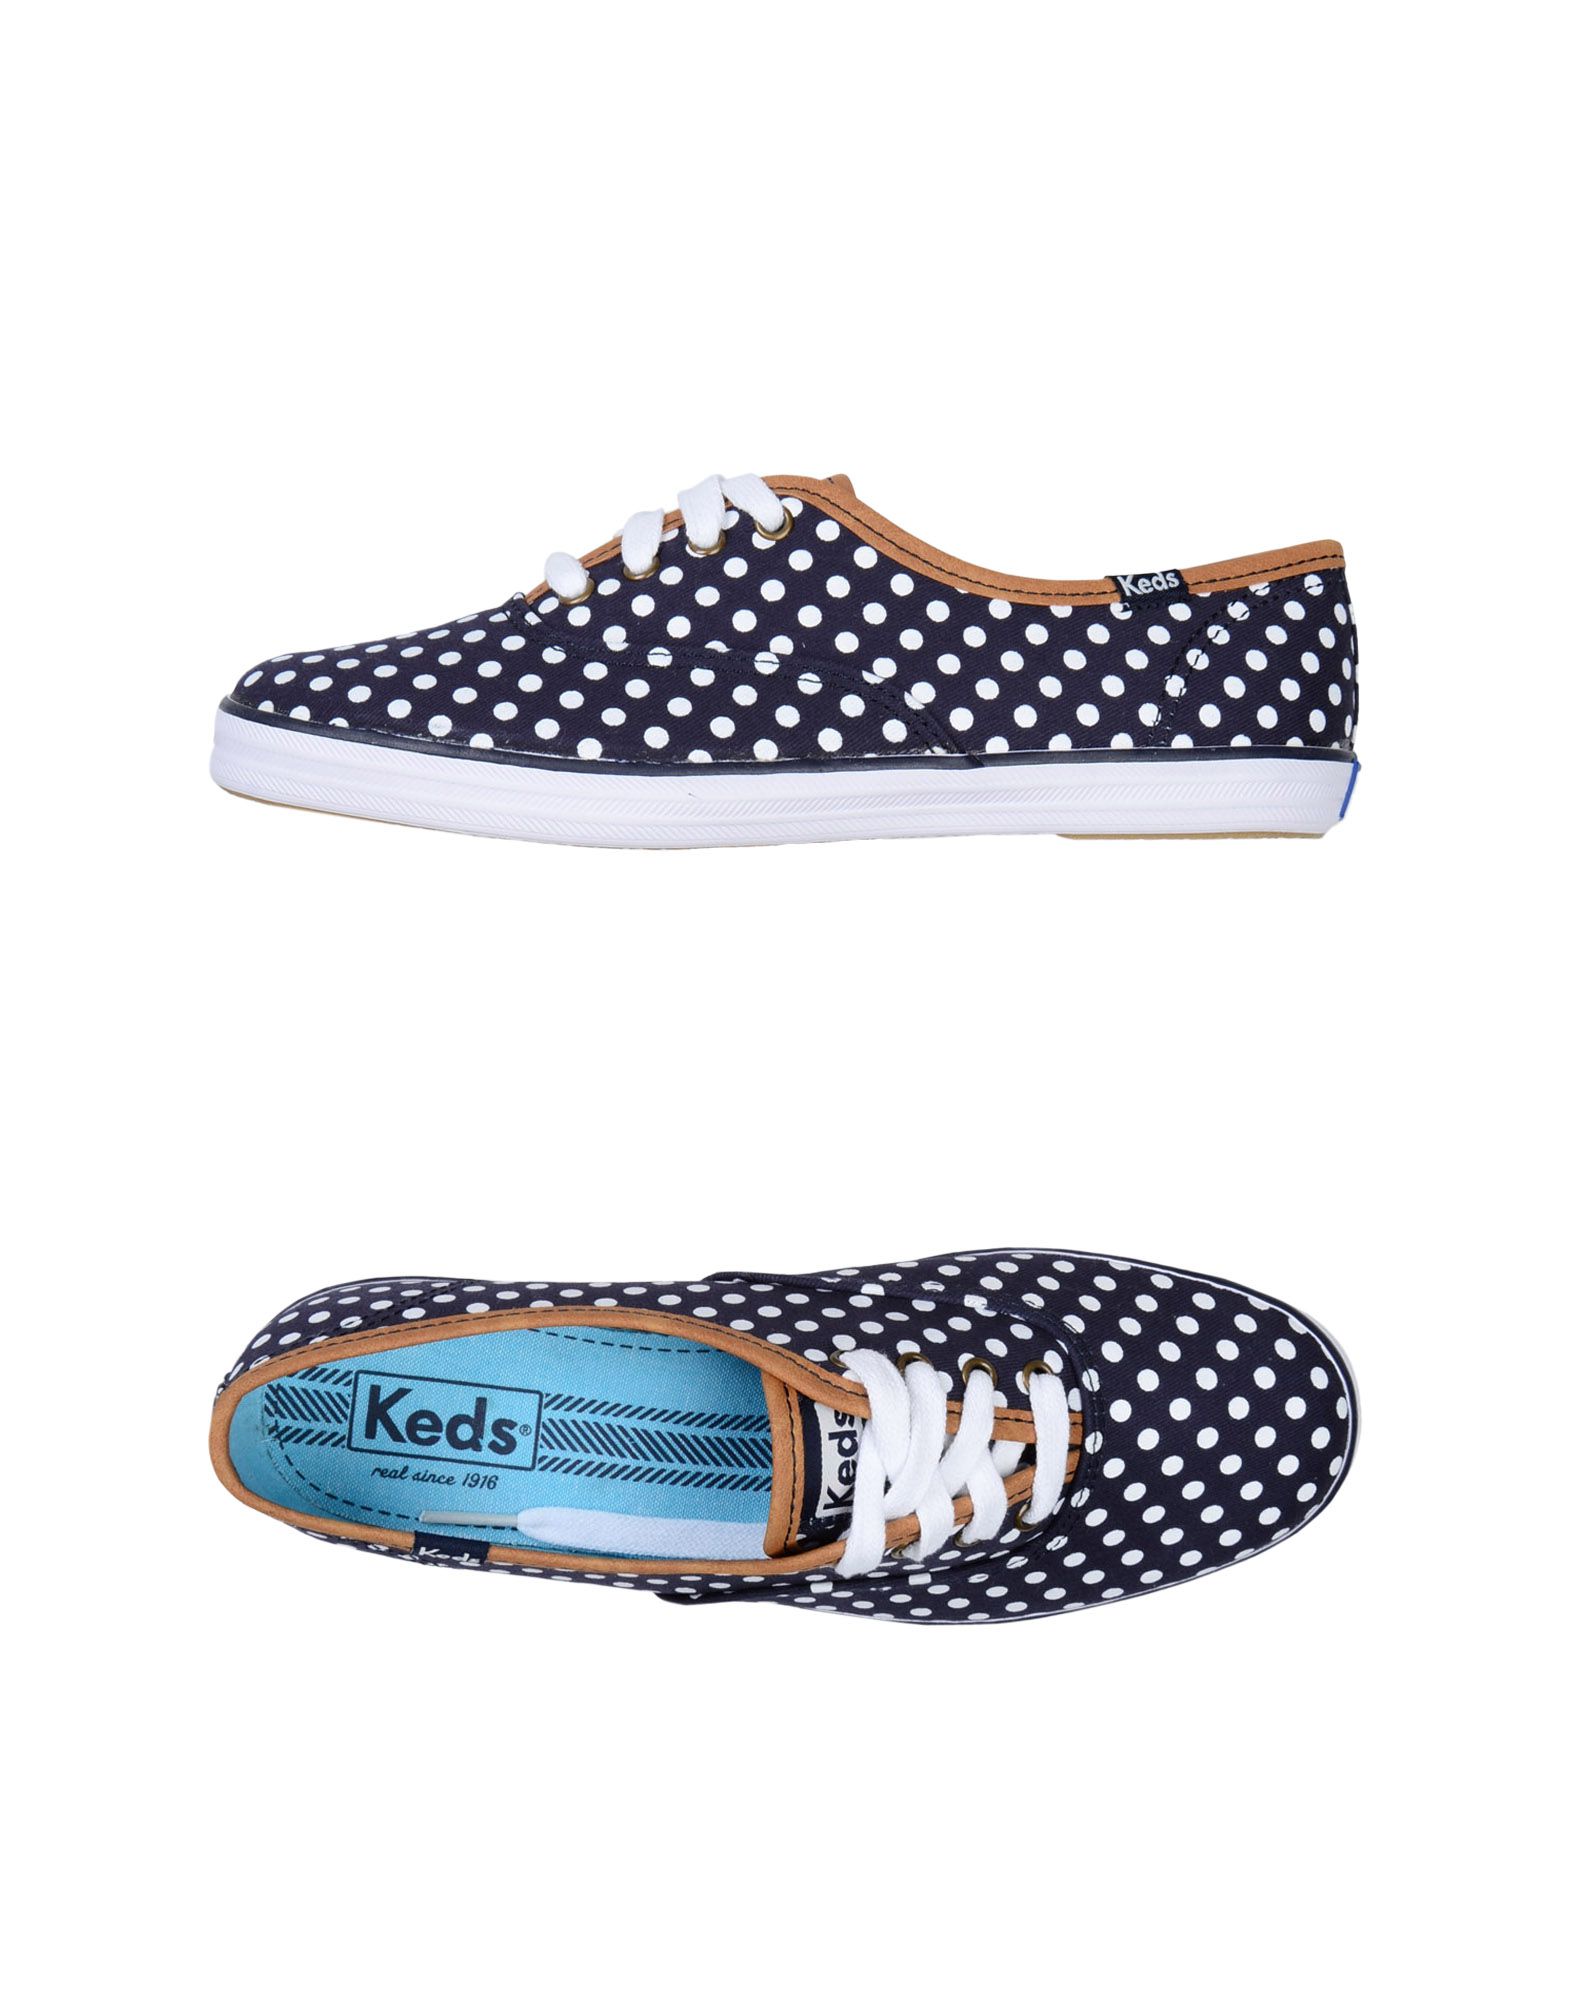 Foto Keds Sneakers Mujer Azul oscuro